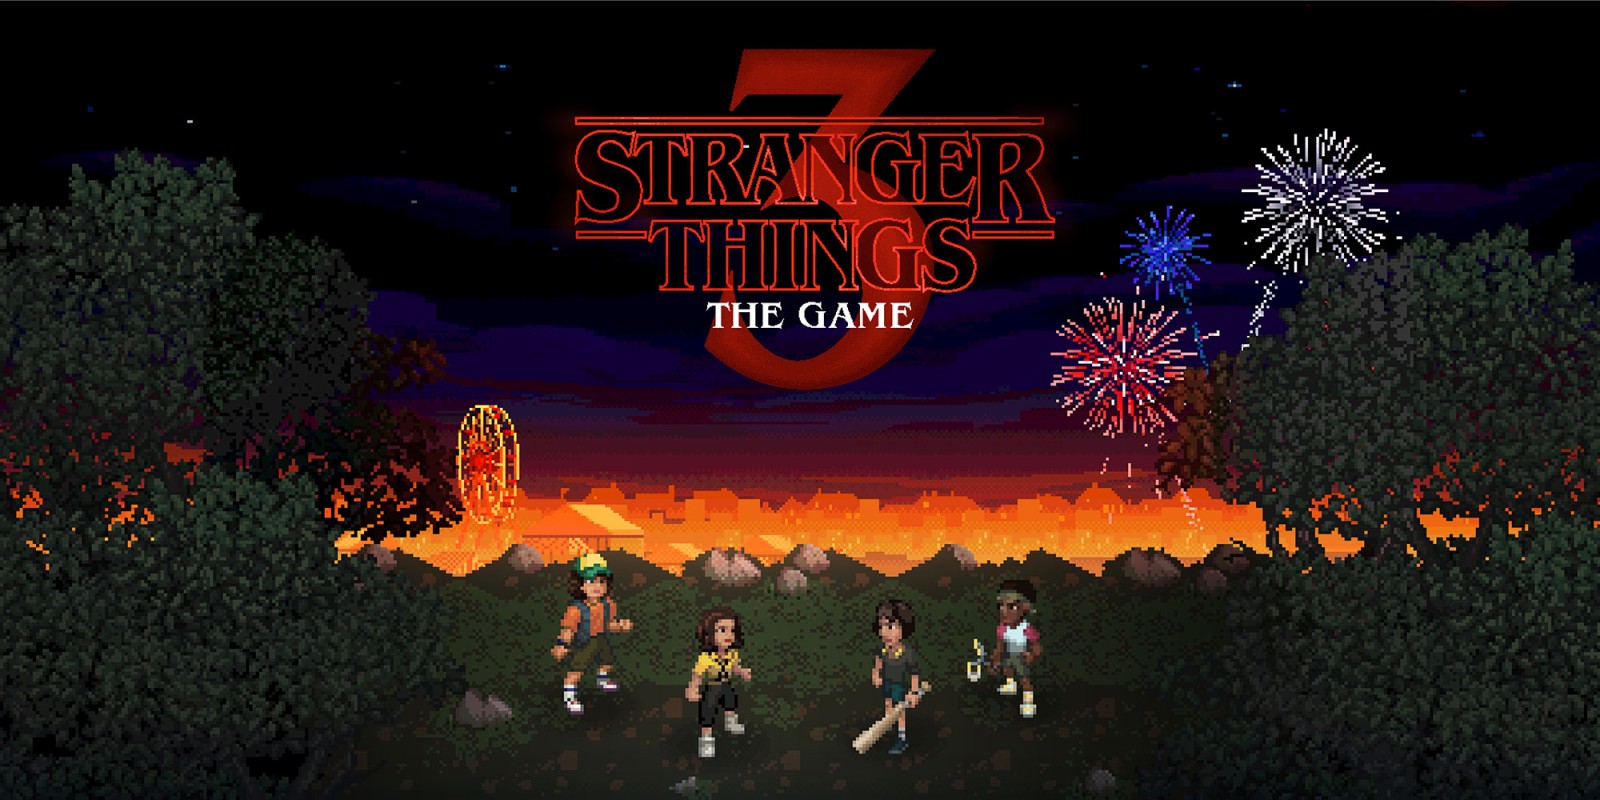 Game play of the stranger things game as played in gaming pc.